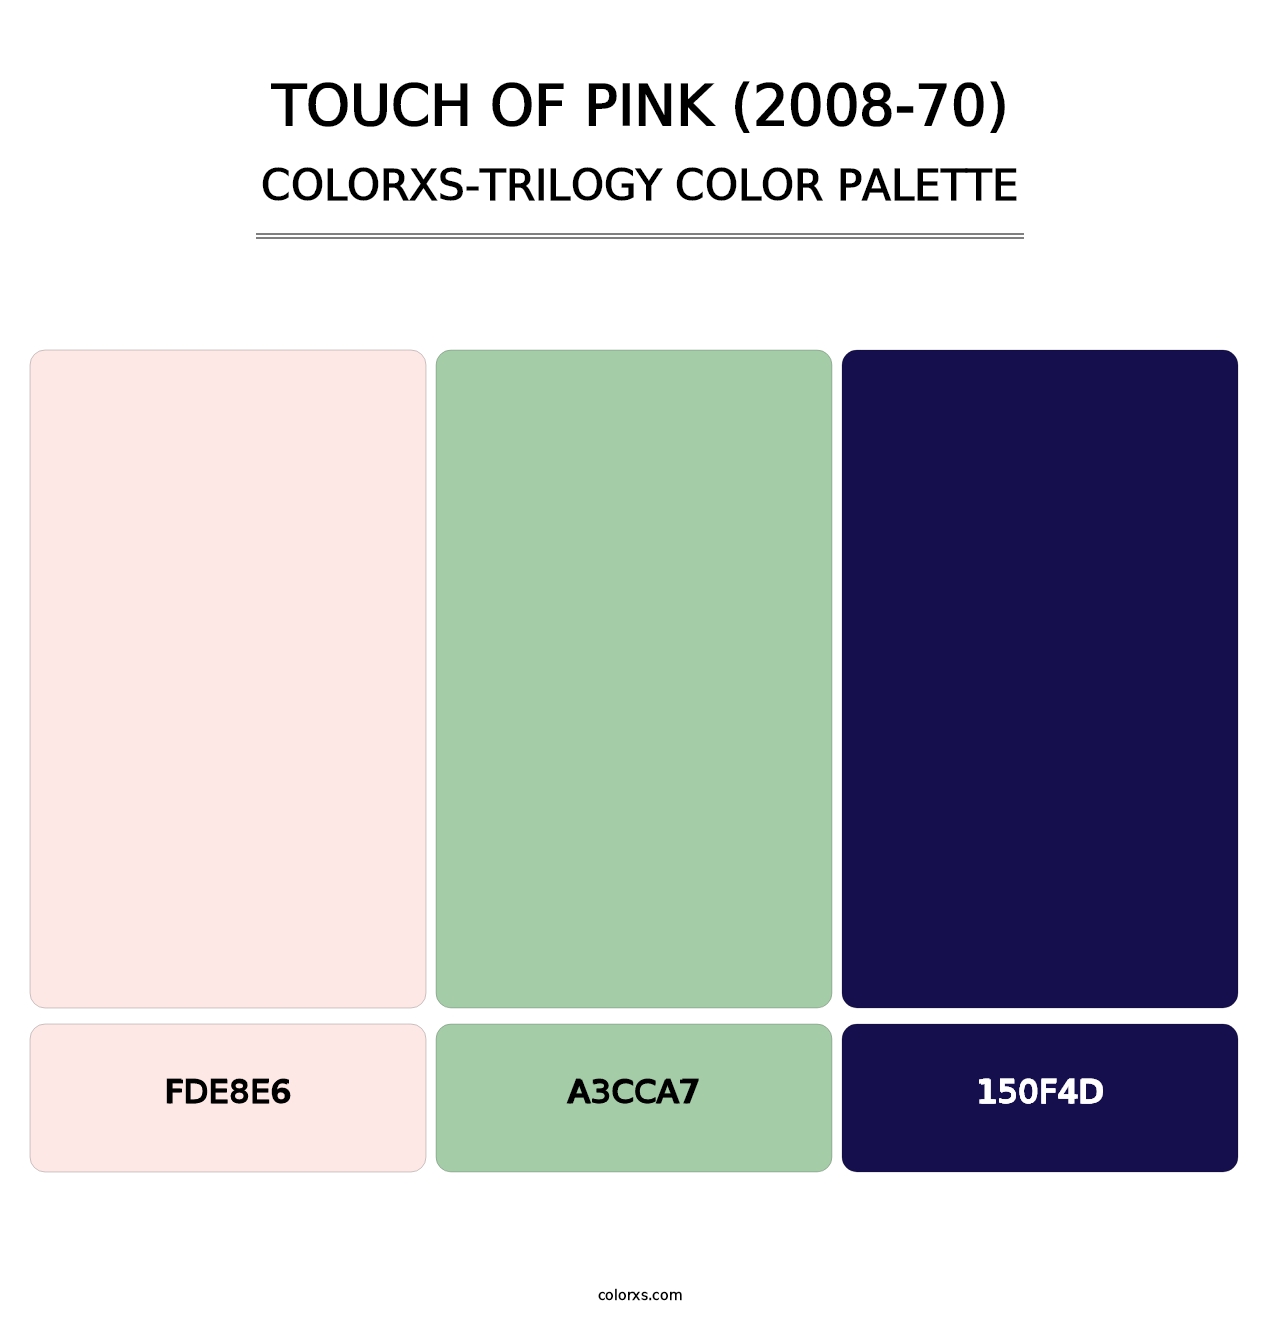 Touch of Pink (2008-70) - Colorxs Trilogy Palette